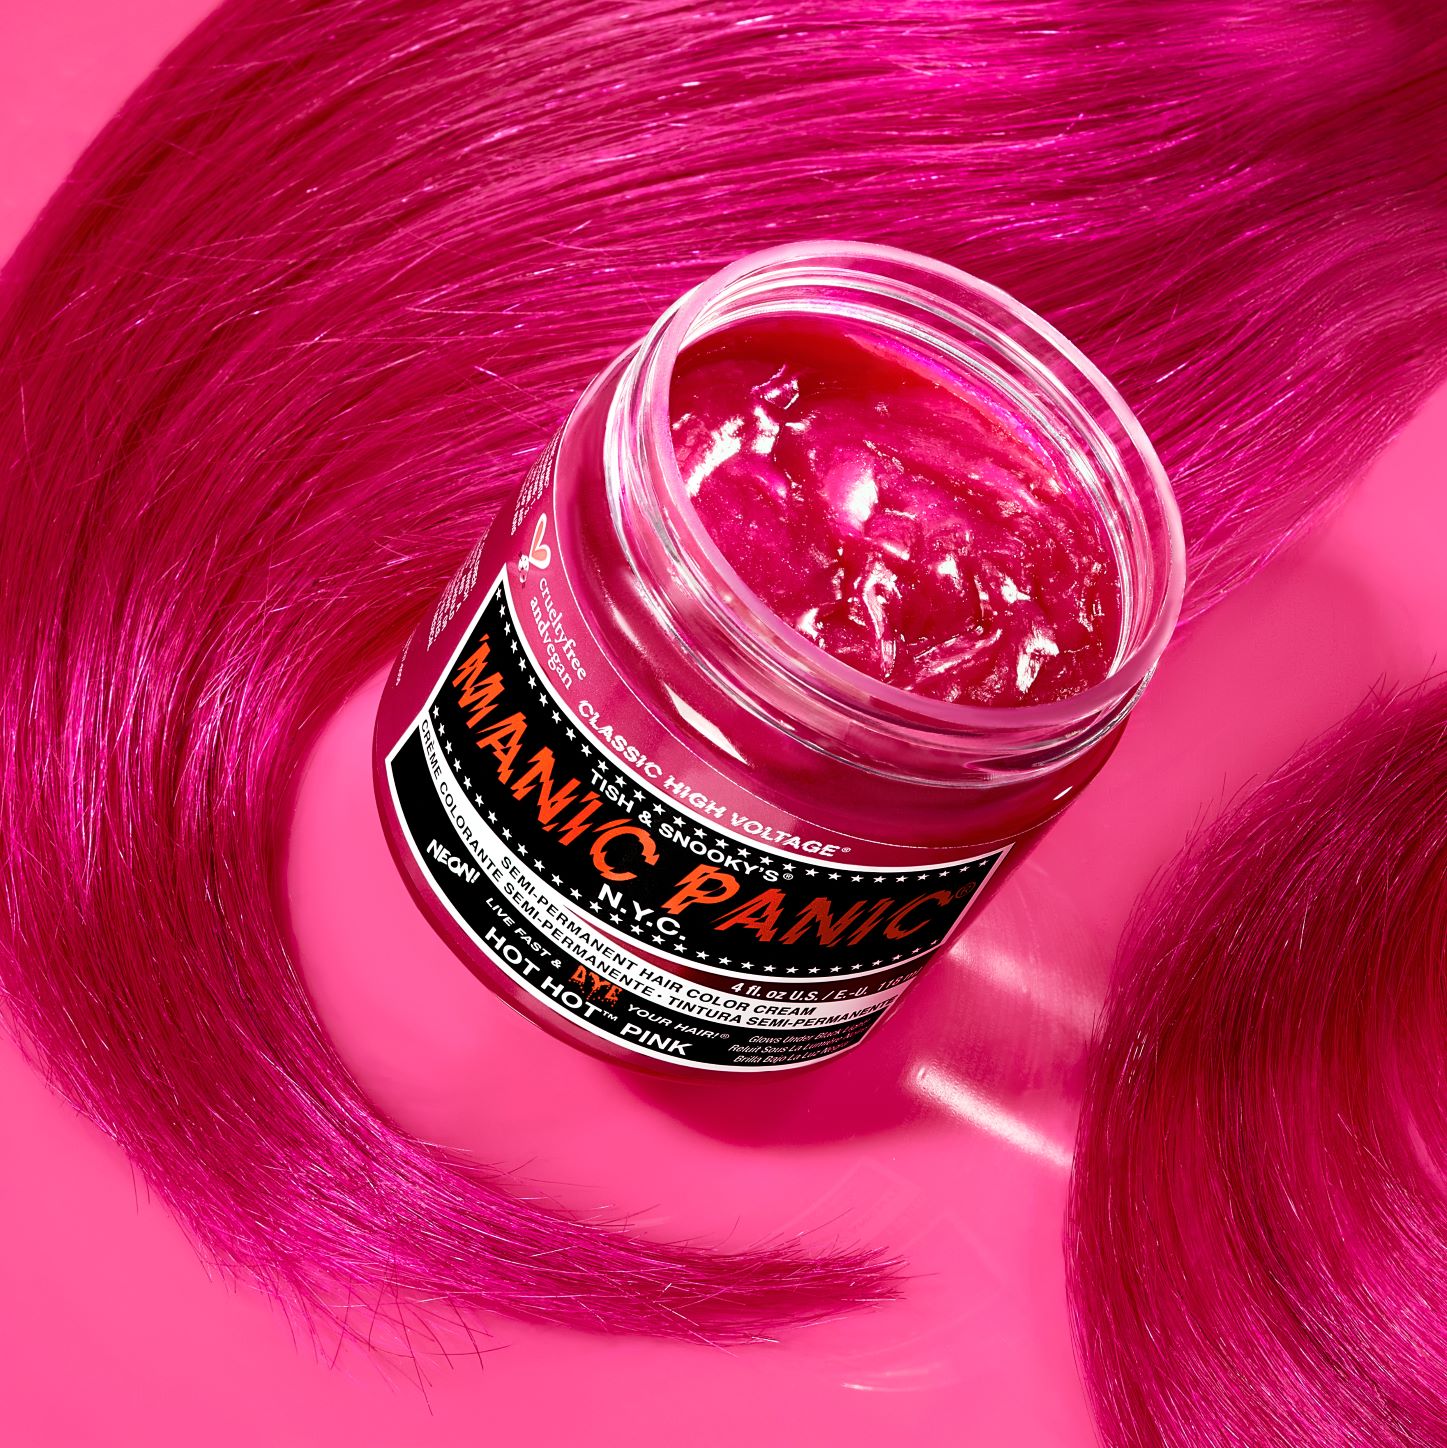 Hot Hot Pink High Voltage Semi-Permanent Hair Color